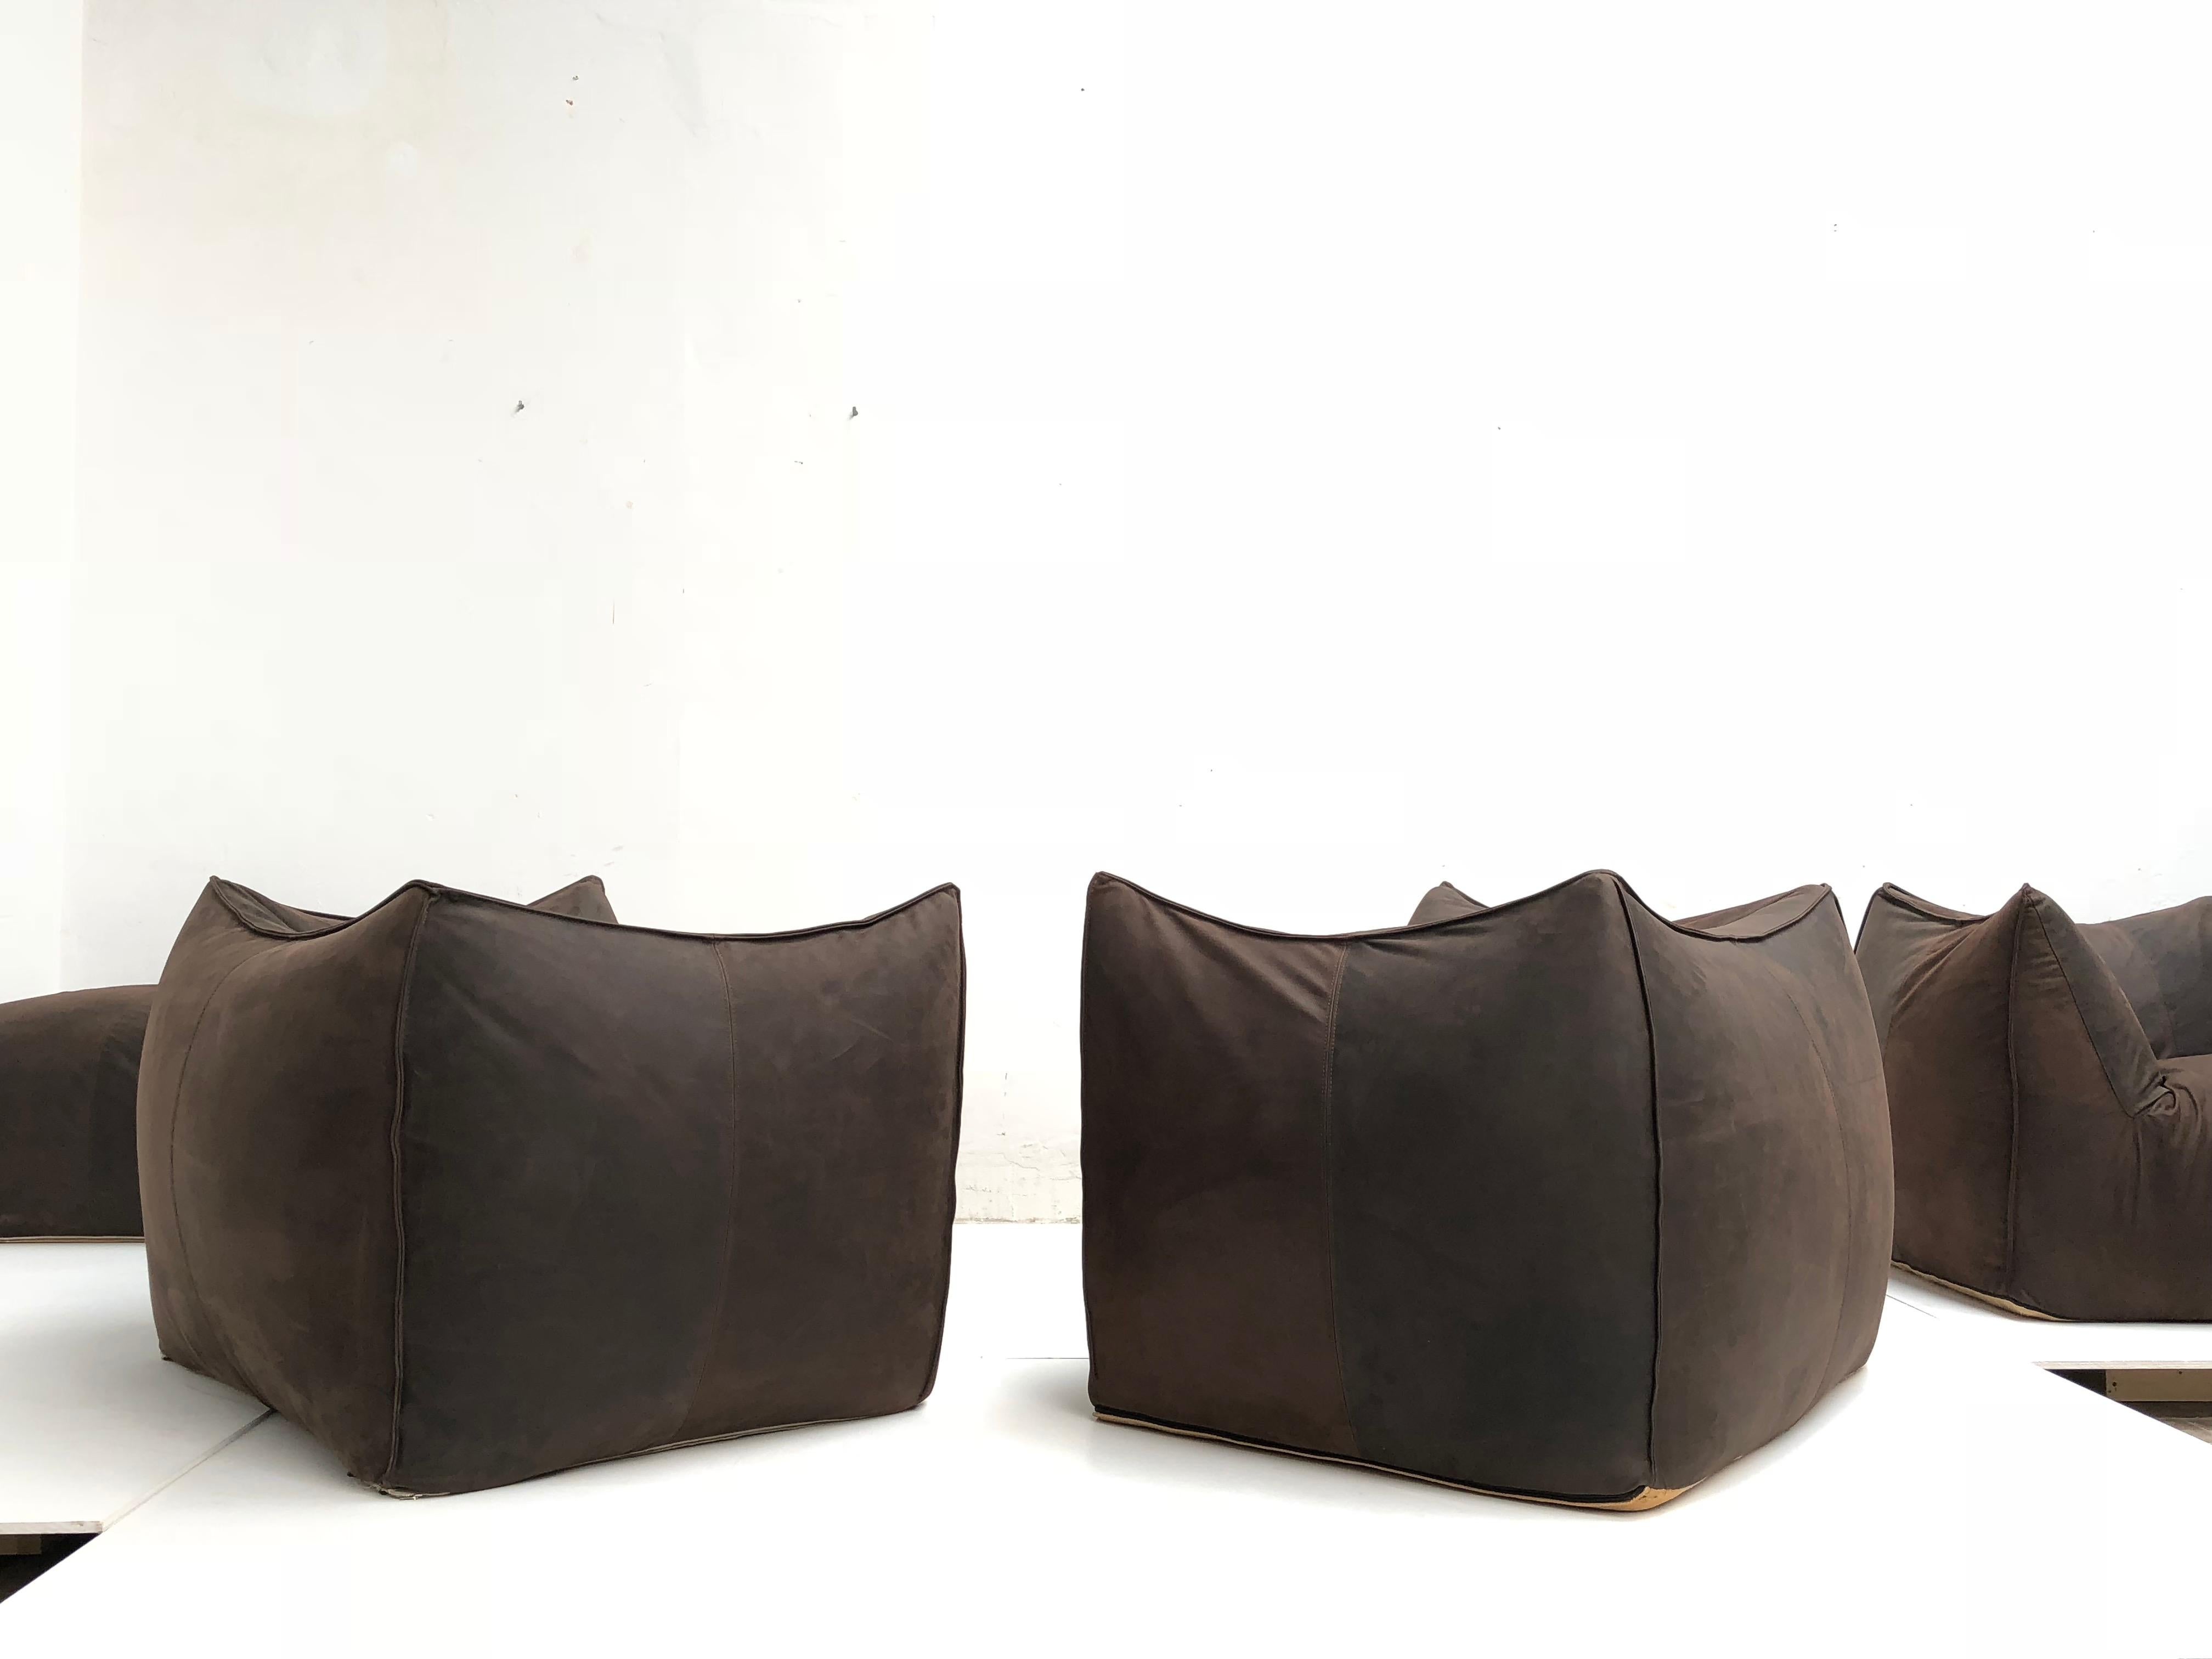 Late 20th Century Leather 'Bambole' Living Room Set by Mario Bellini, 1972, Original Period Labels